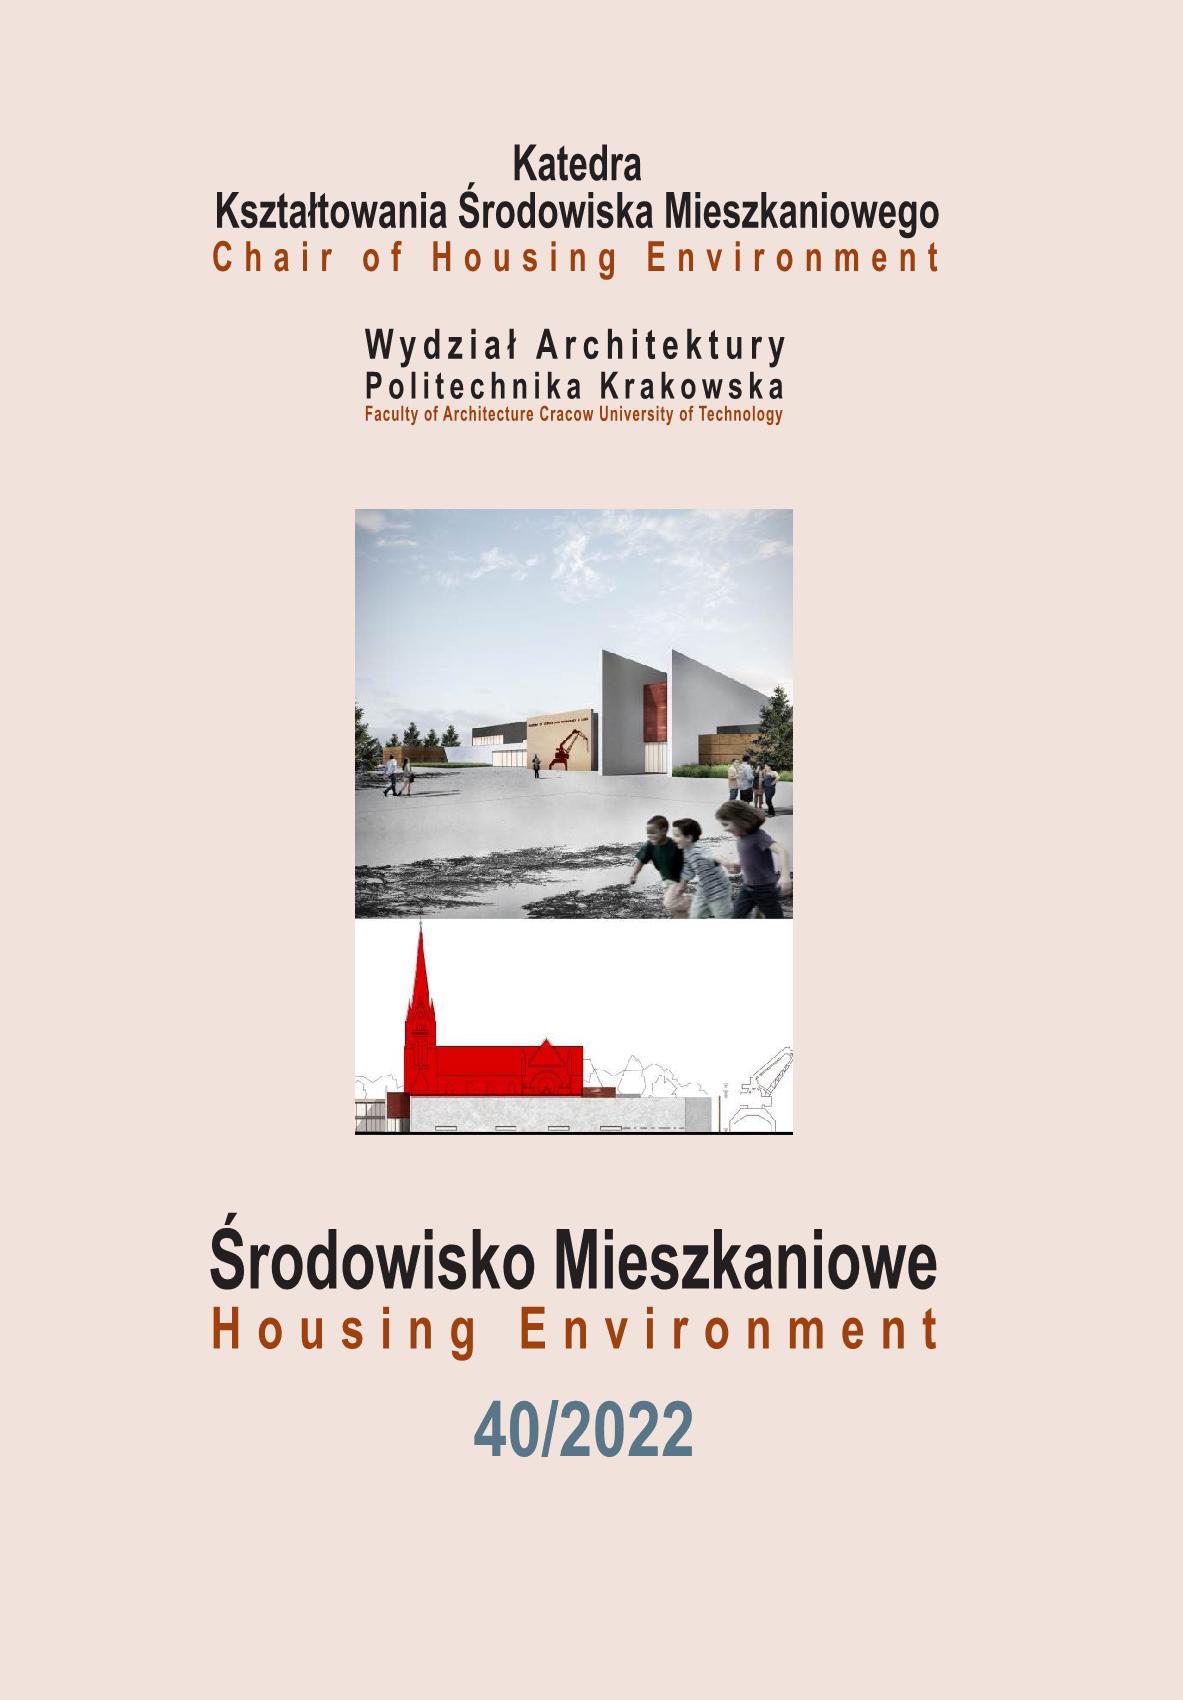 Dimension, development and identification of locus sacer in living space of the 21st century:
A case study at the heart of a new housing
district – Freiburg, Germany (part 2) Cover Image